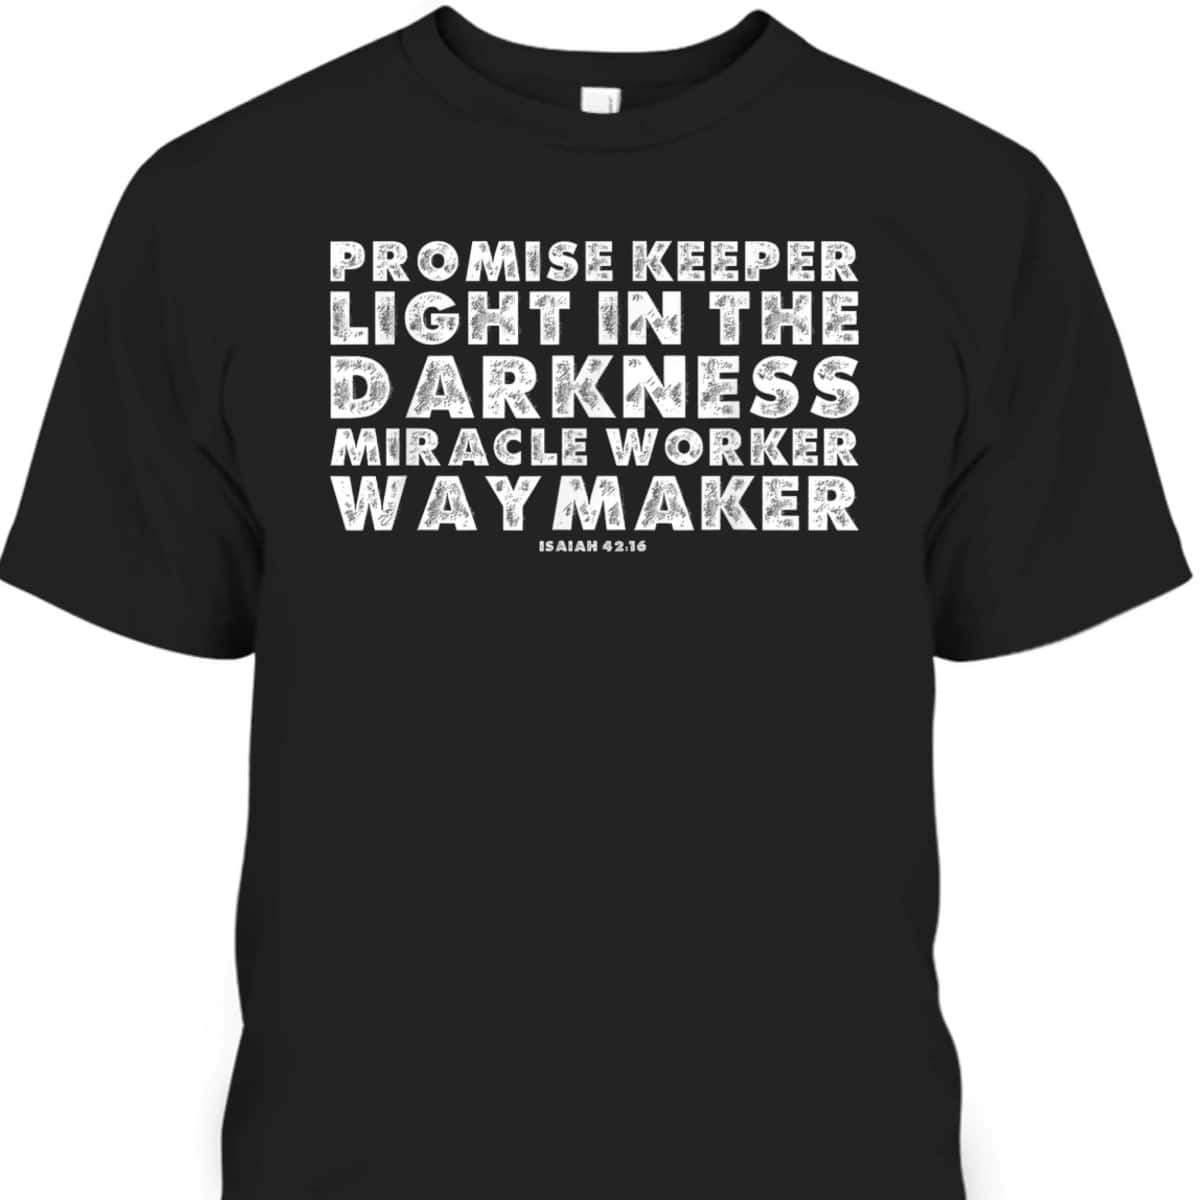 Christian Faith Waymaker T-Shirt Promise Keeper Miracle Worker Isaiah 42:16